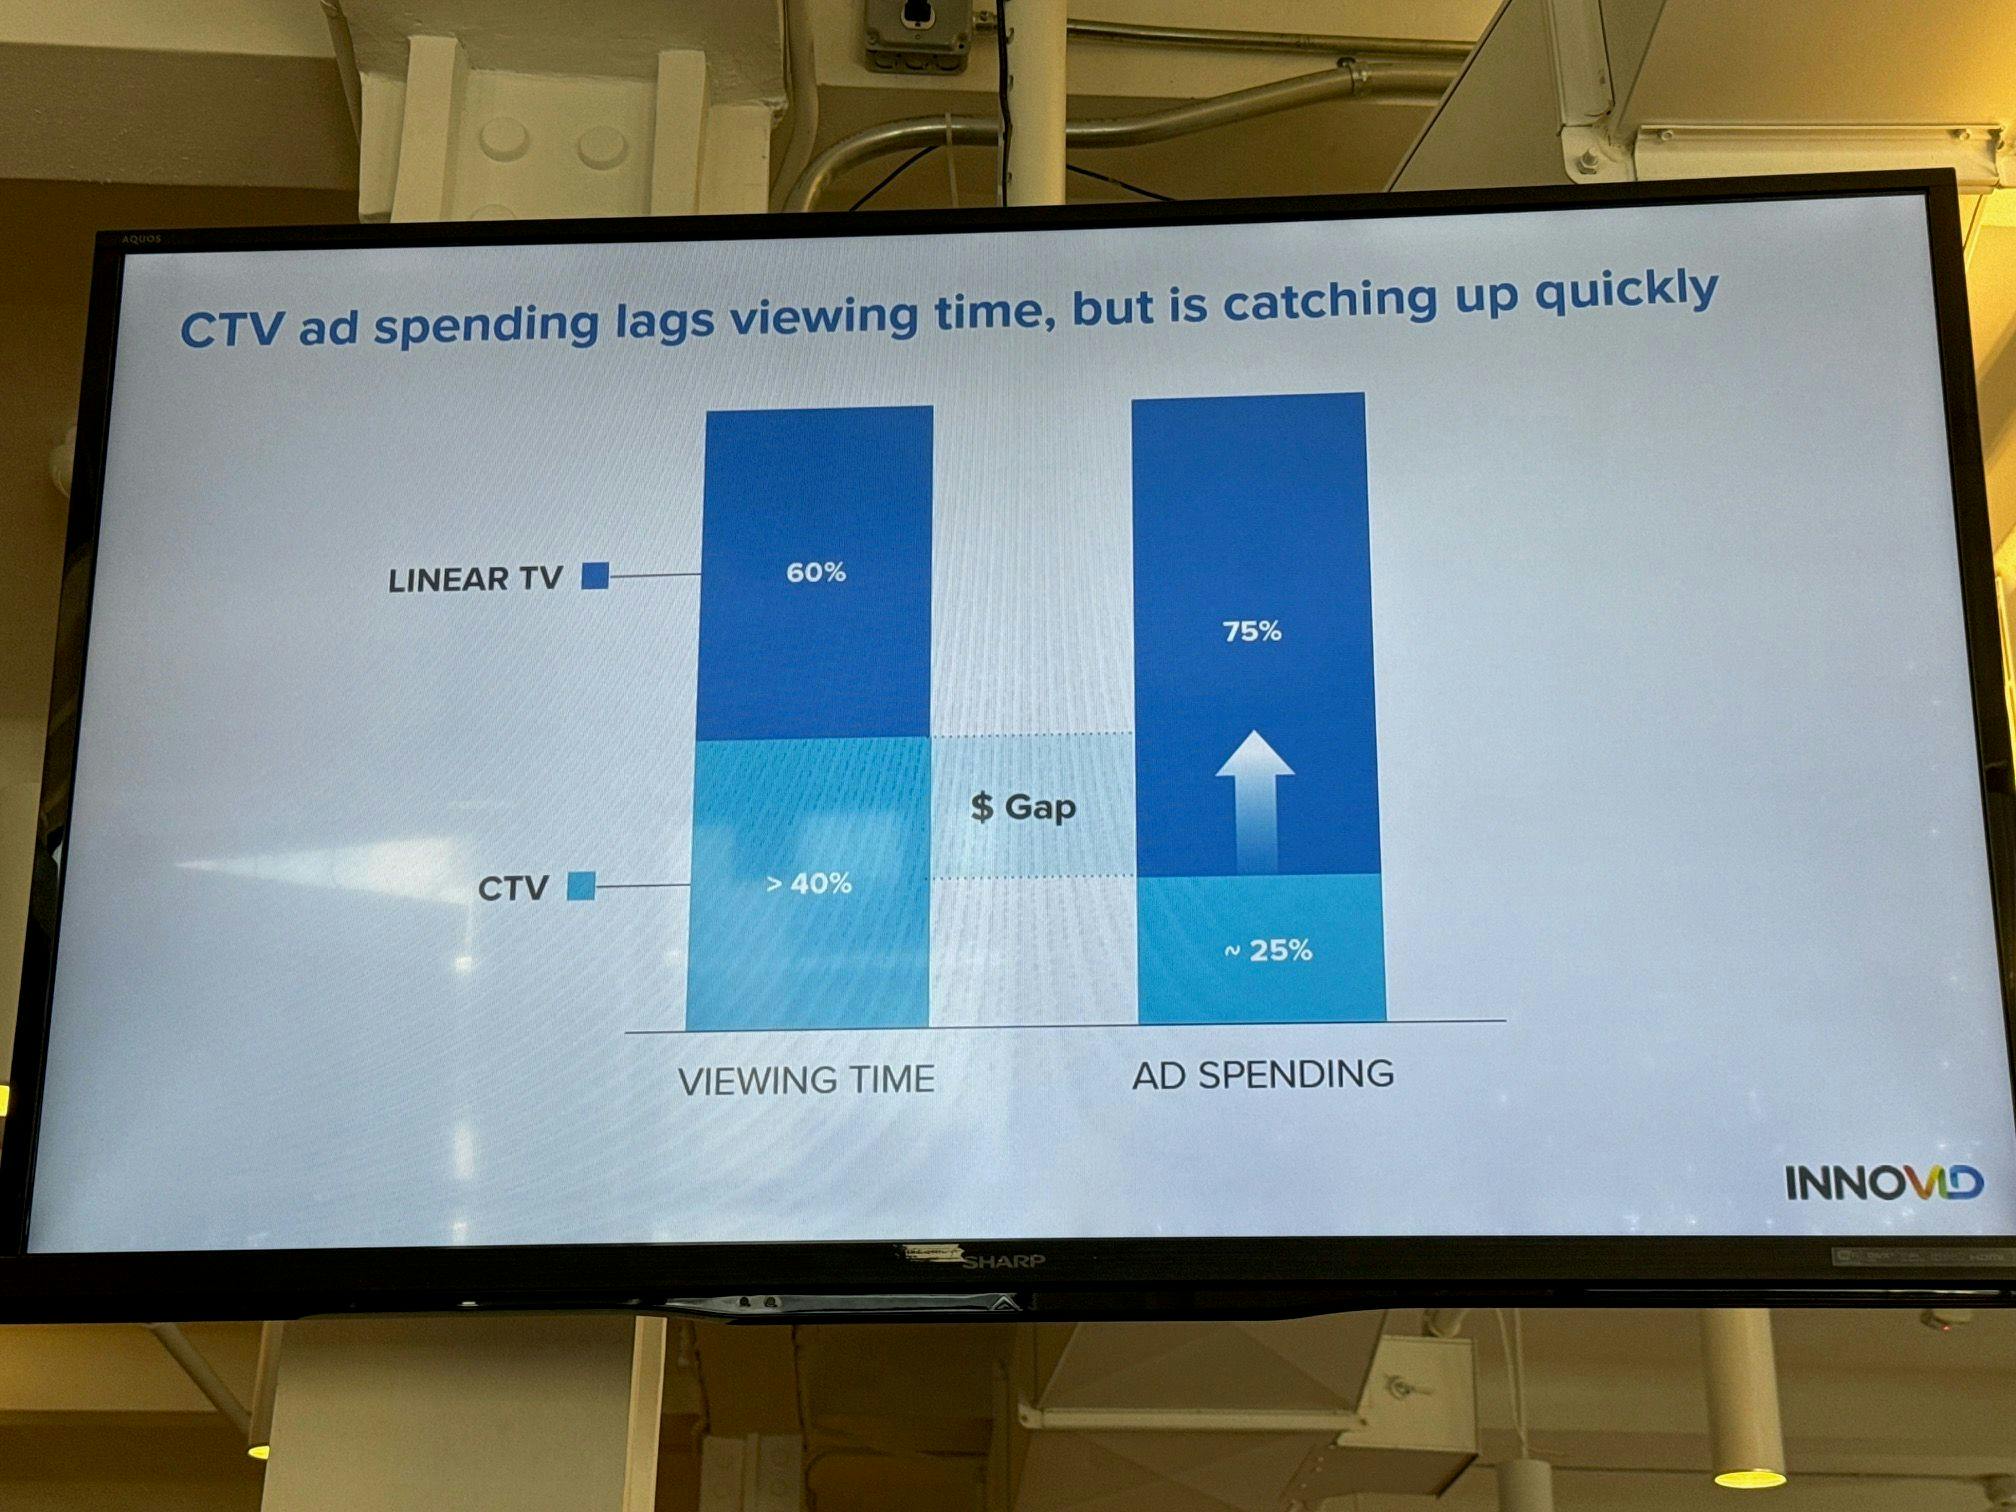 CTV ad spend is catching up quickly to viewing time